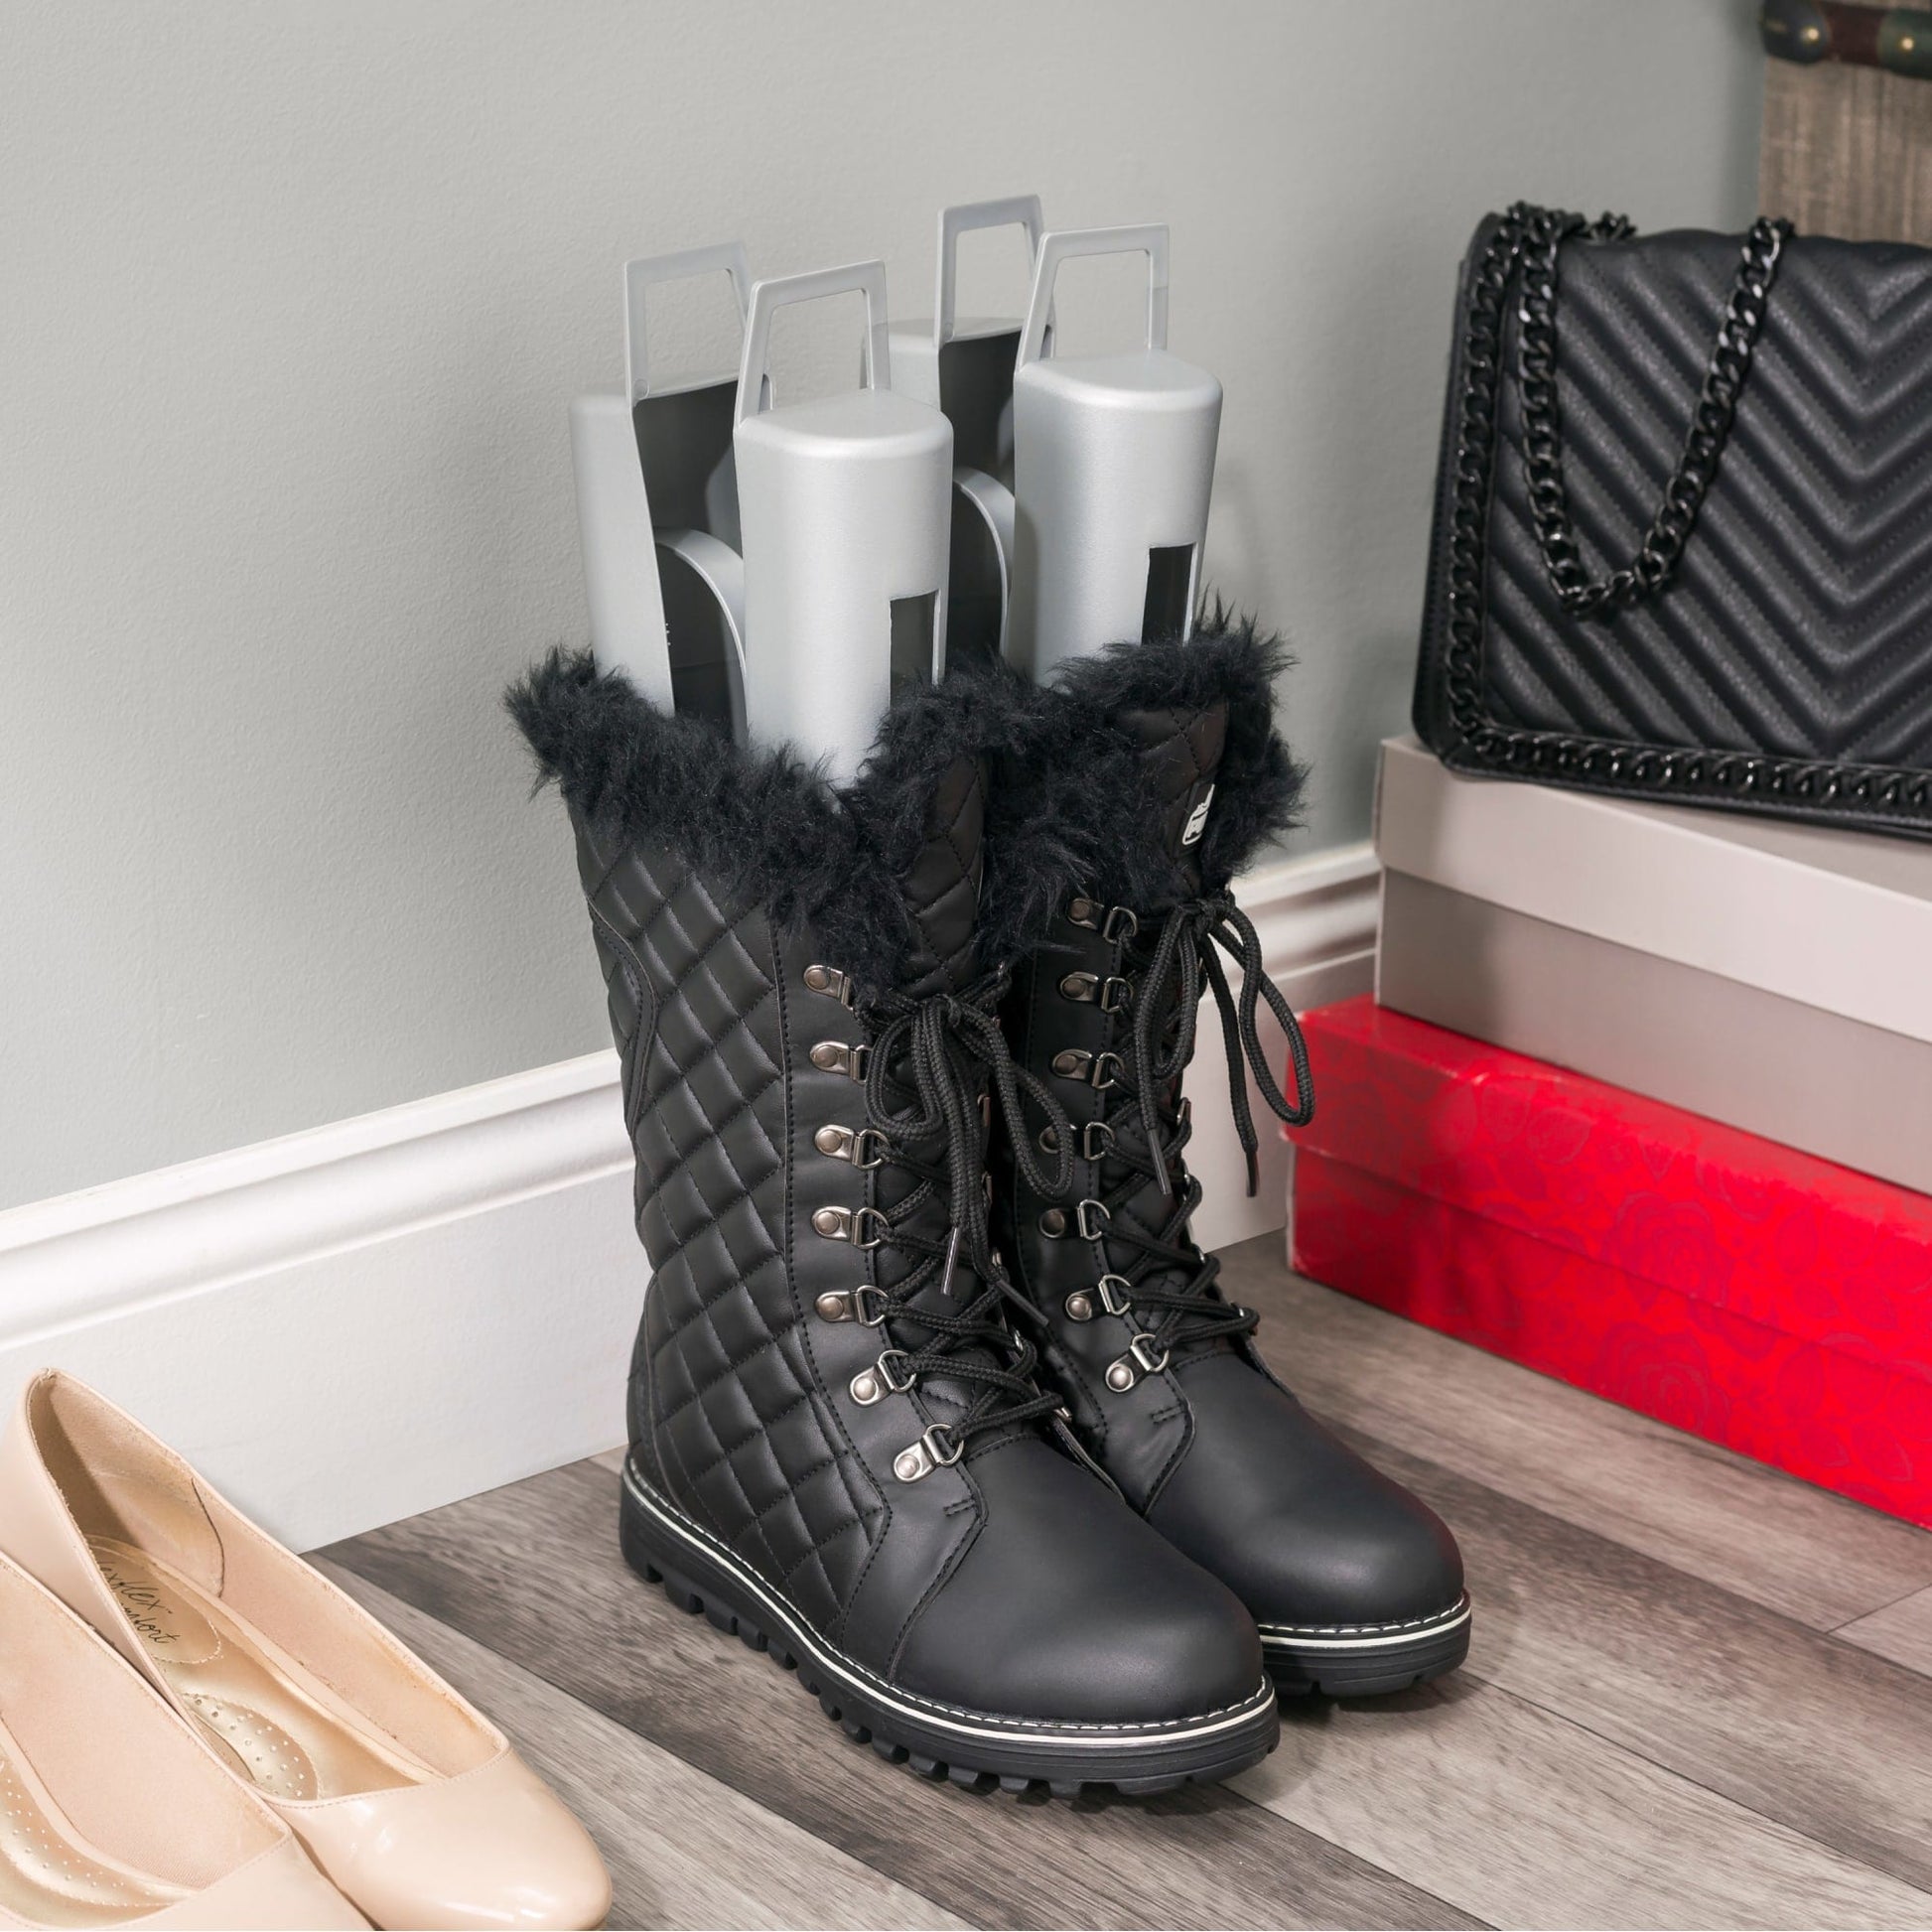 How to Keep Tall Boots from Slouching (And Organize Your Closet